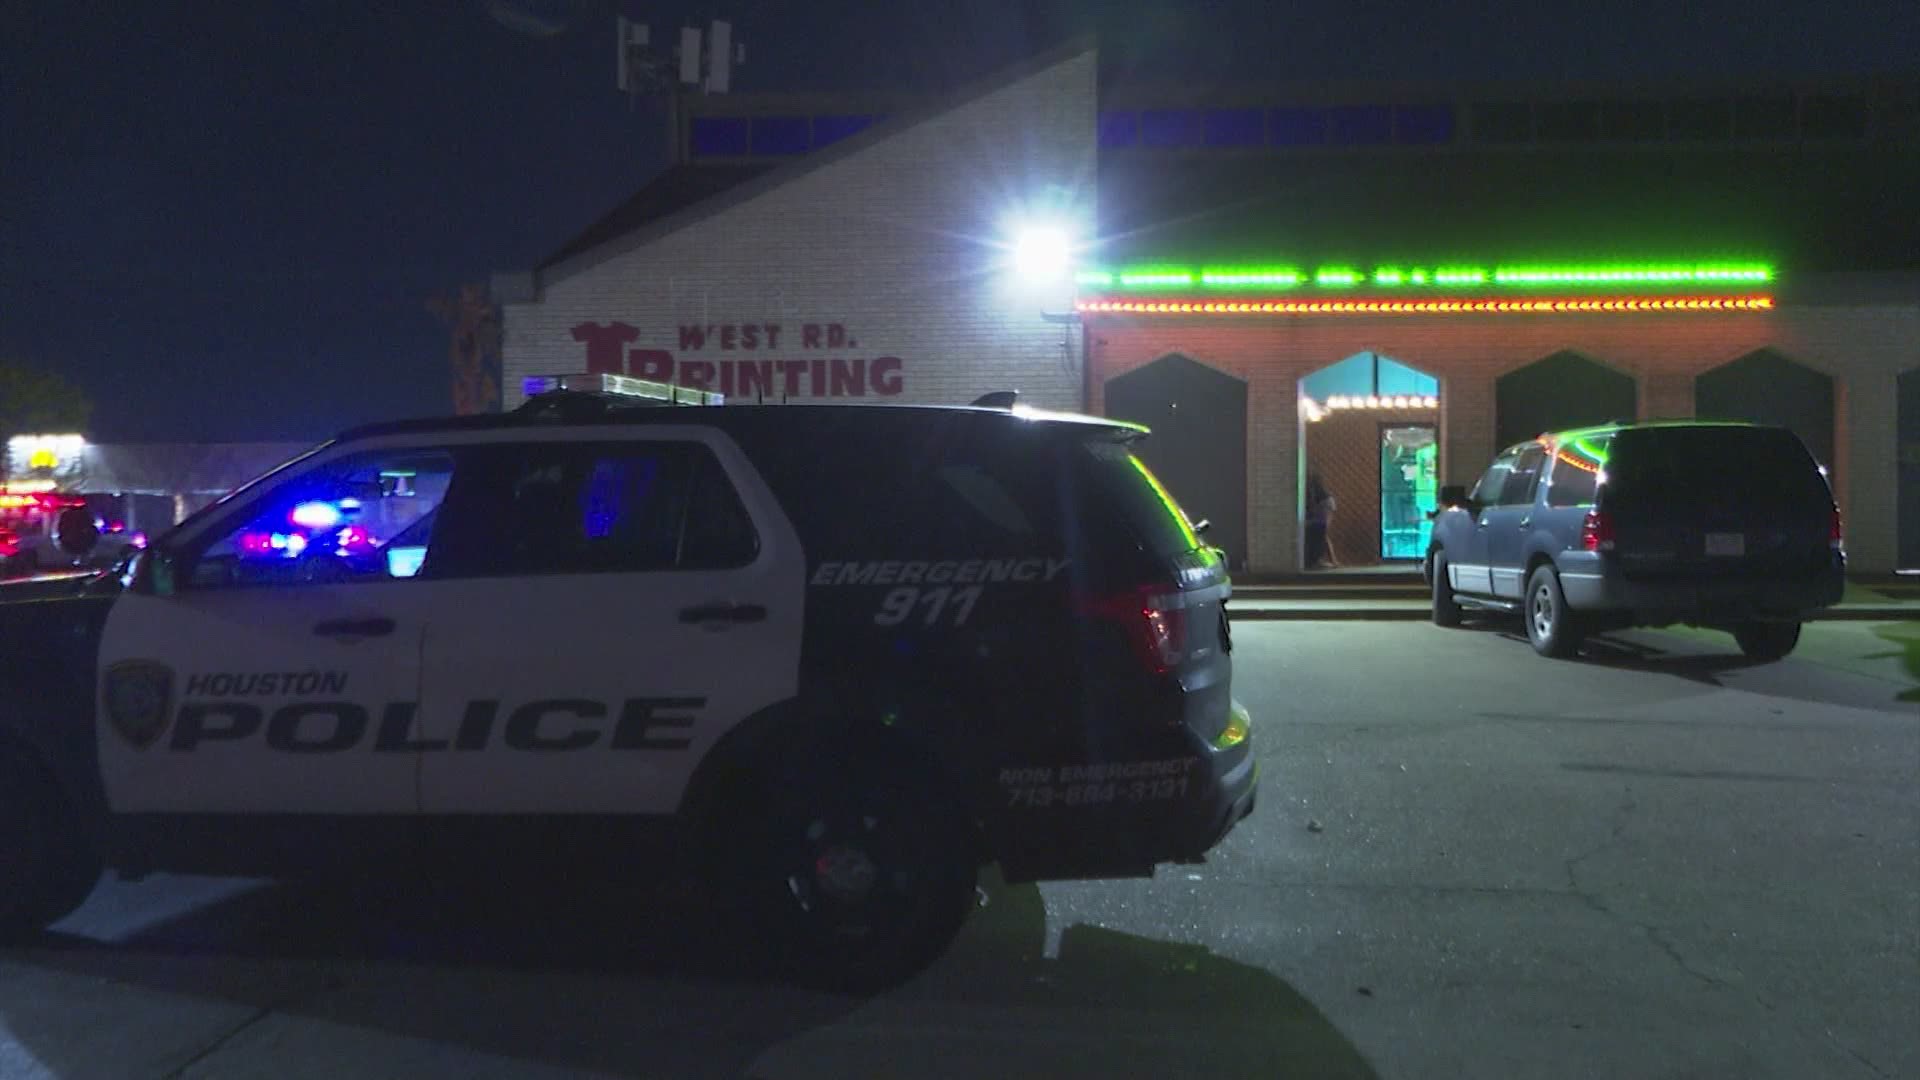 Houston police are investigating a shooting inside an after-hours nightclub that left 5 people injured. One of the victims is in critical condition at the hospital.